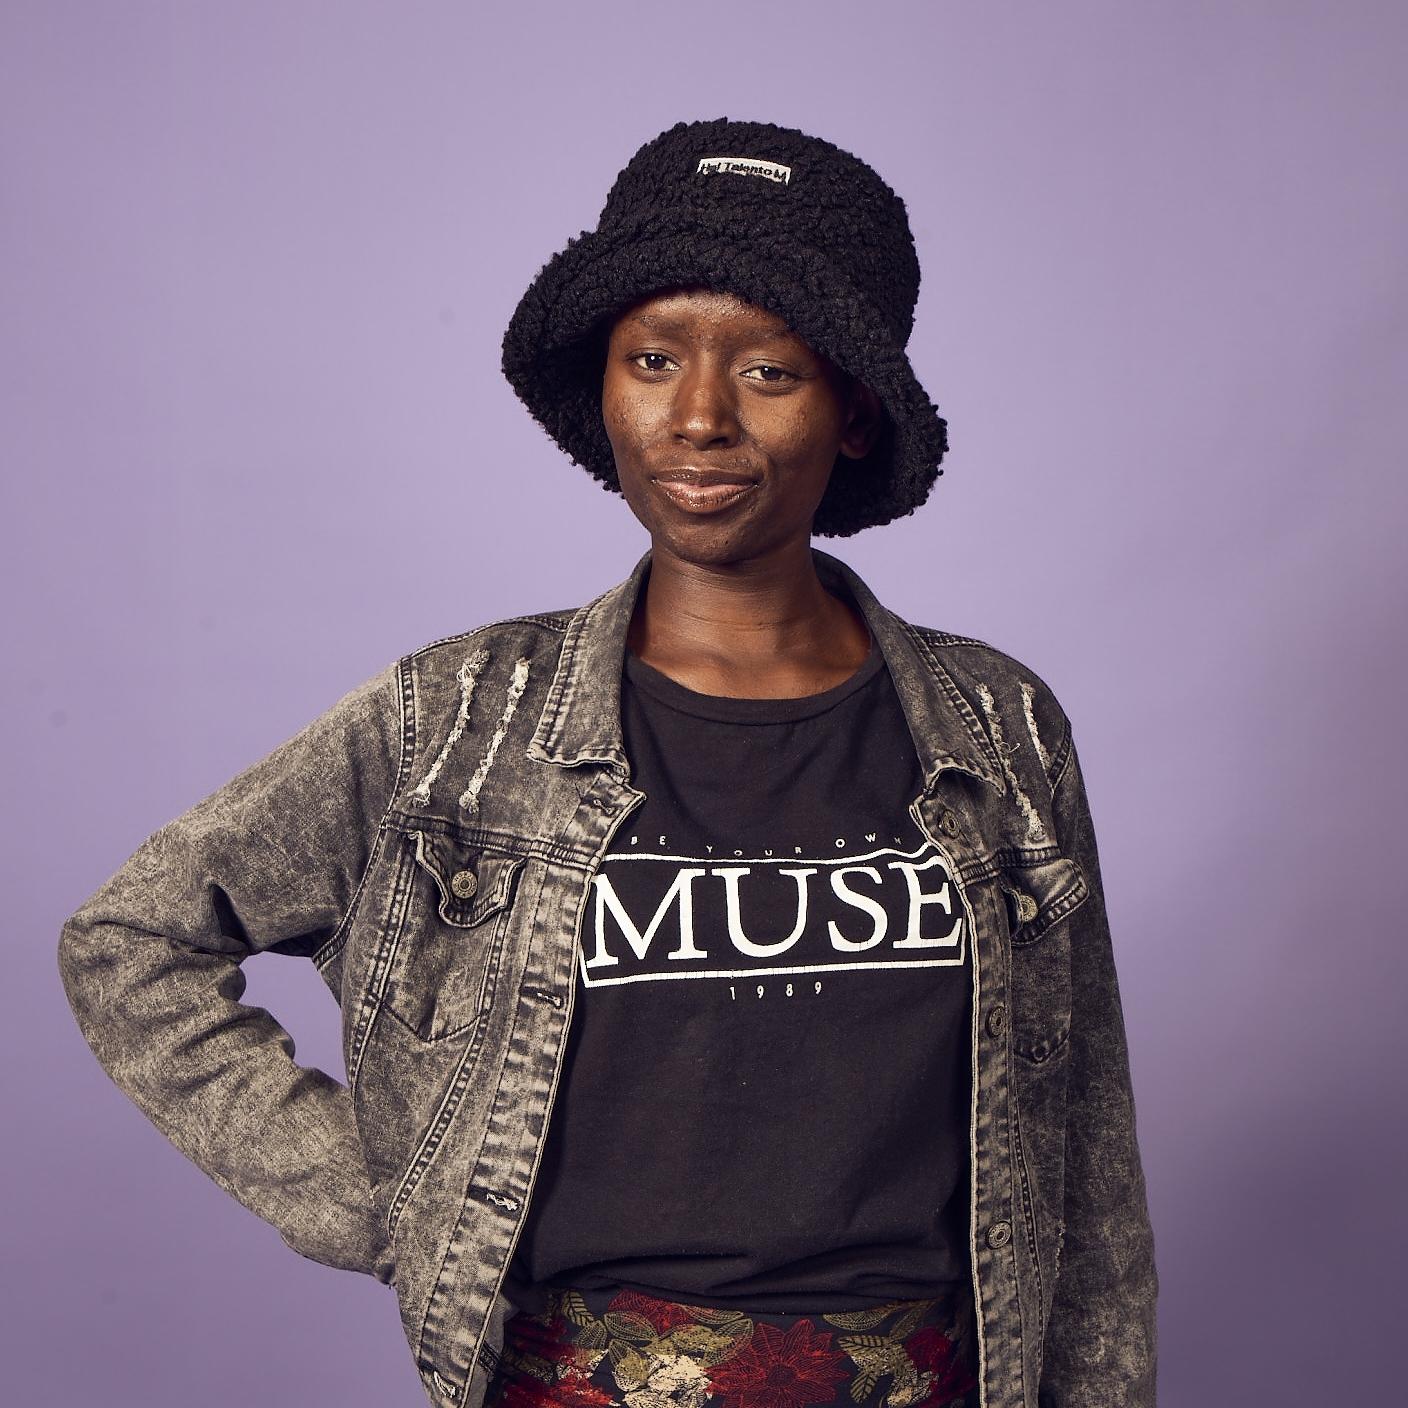 Winnie, a young women in a black bucket hat, grey jacket, black t-shirt and patterned leggings stands in front of a lilac wall